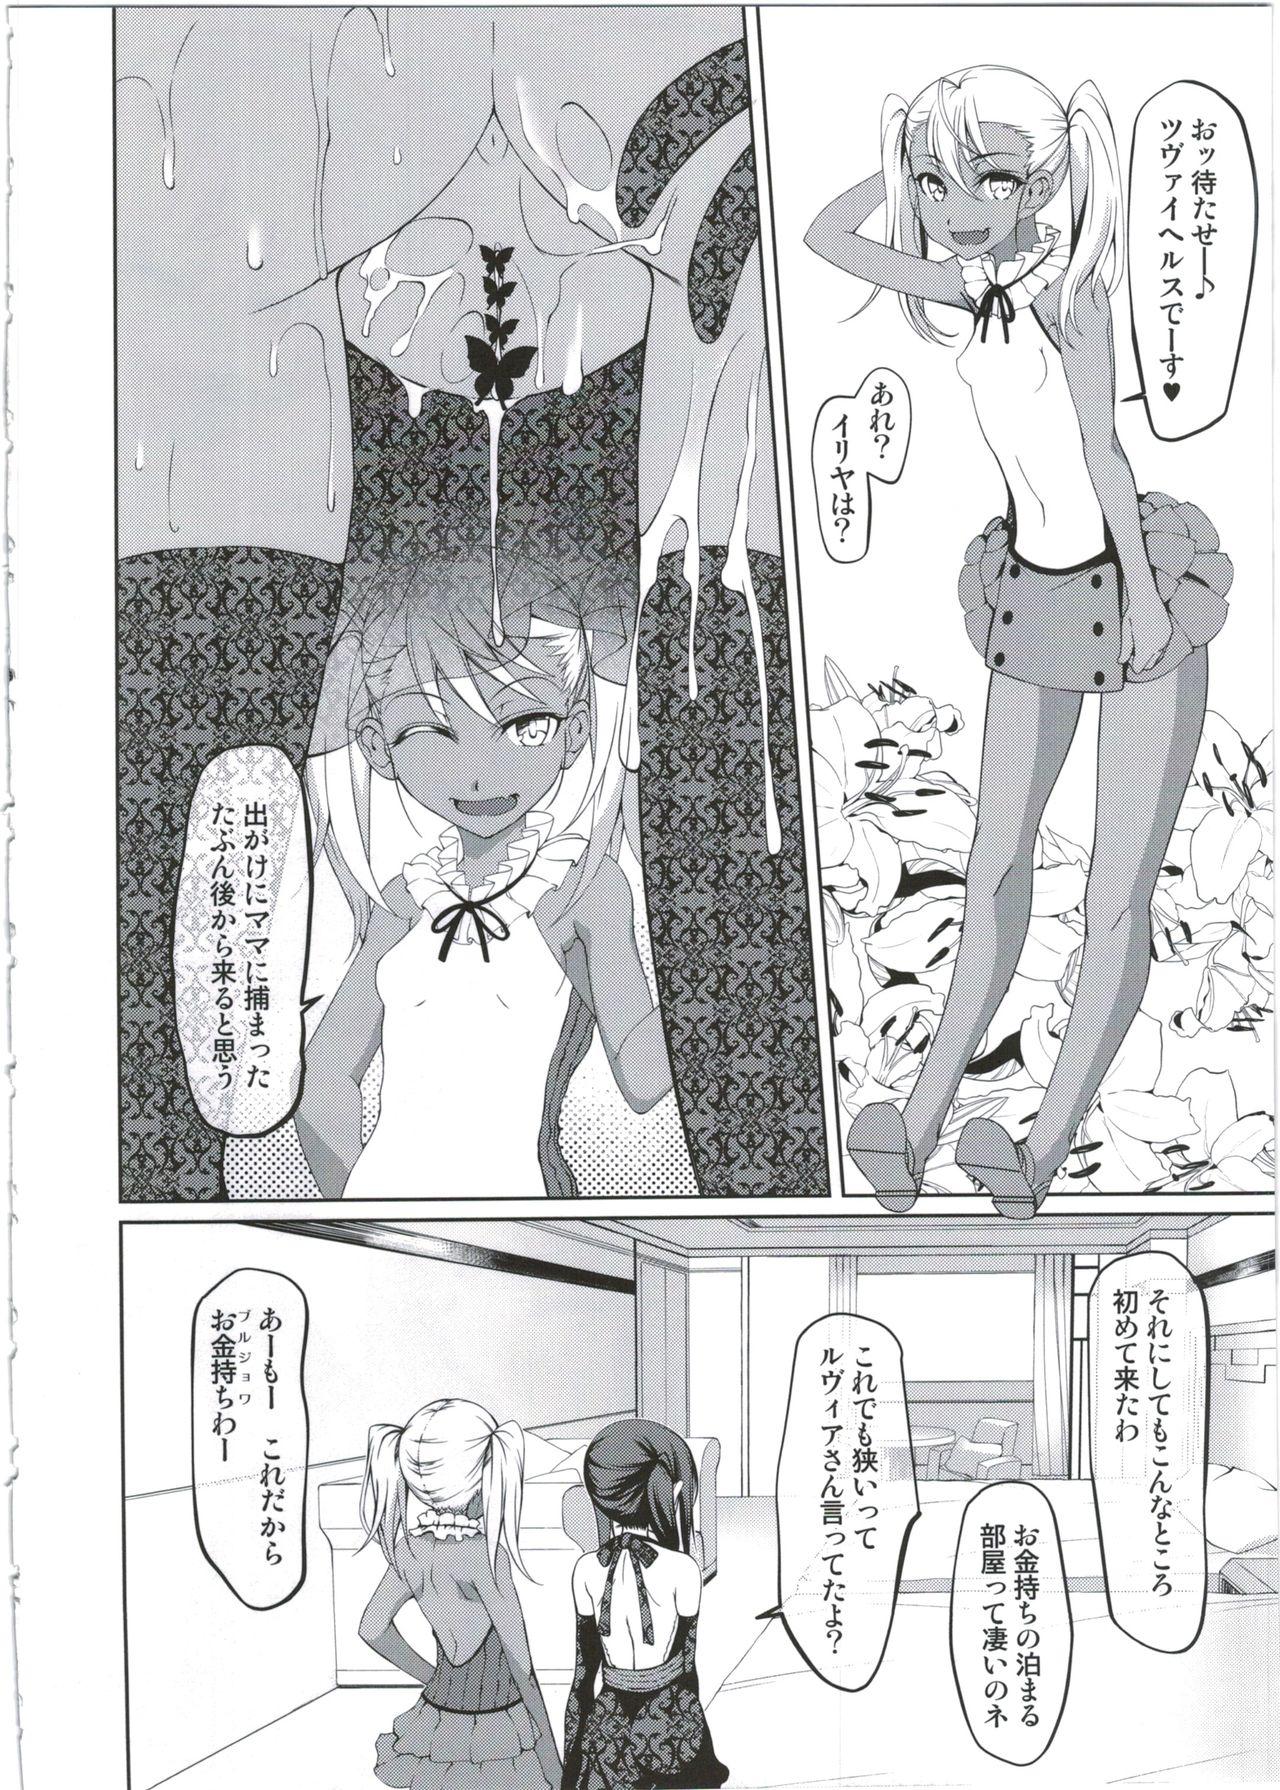 Affair SHG:03 - Fate kaleid liner prisma illya Gay Outdoors - Page 10